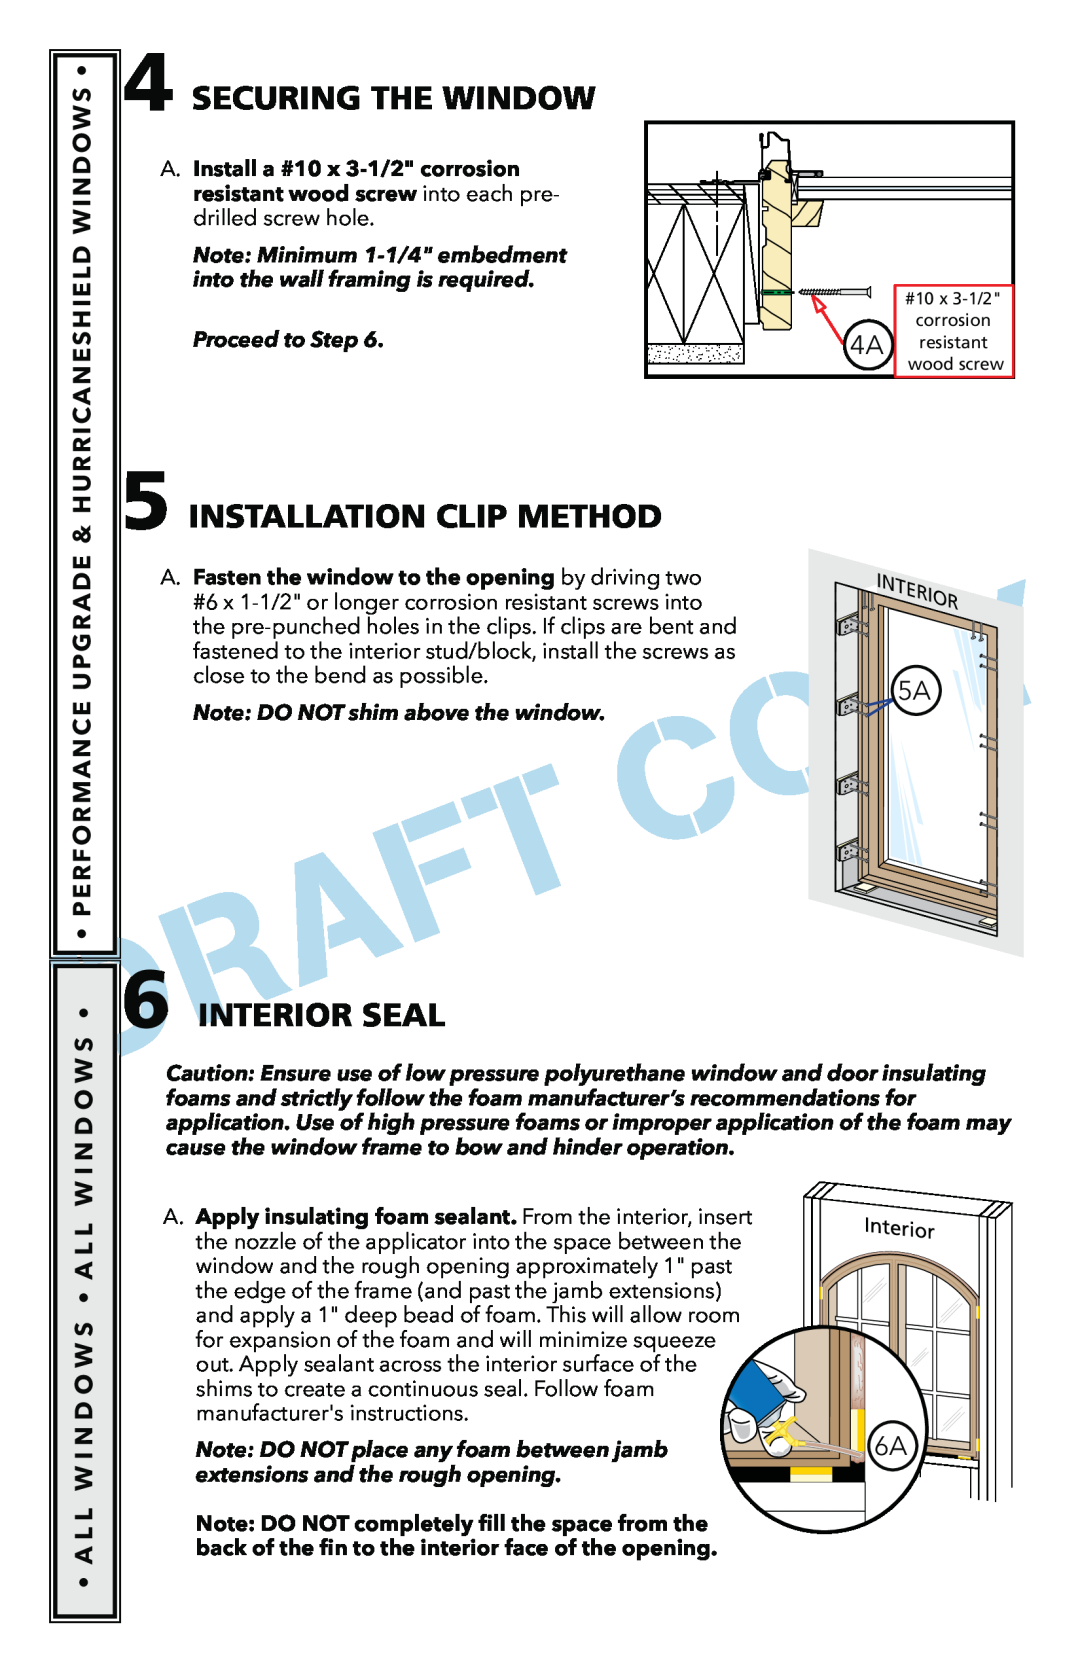 Pella 801U0103 installation instructions Securing The Window, Installation Clip Method, Interior Seal, Proceed to Step 